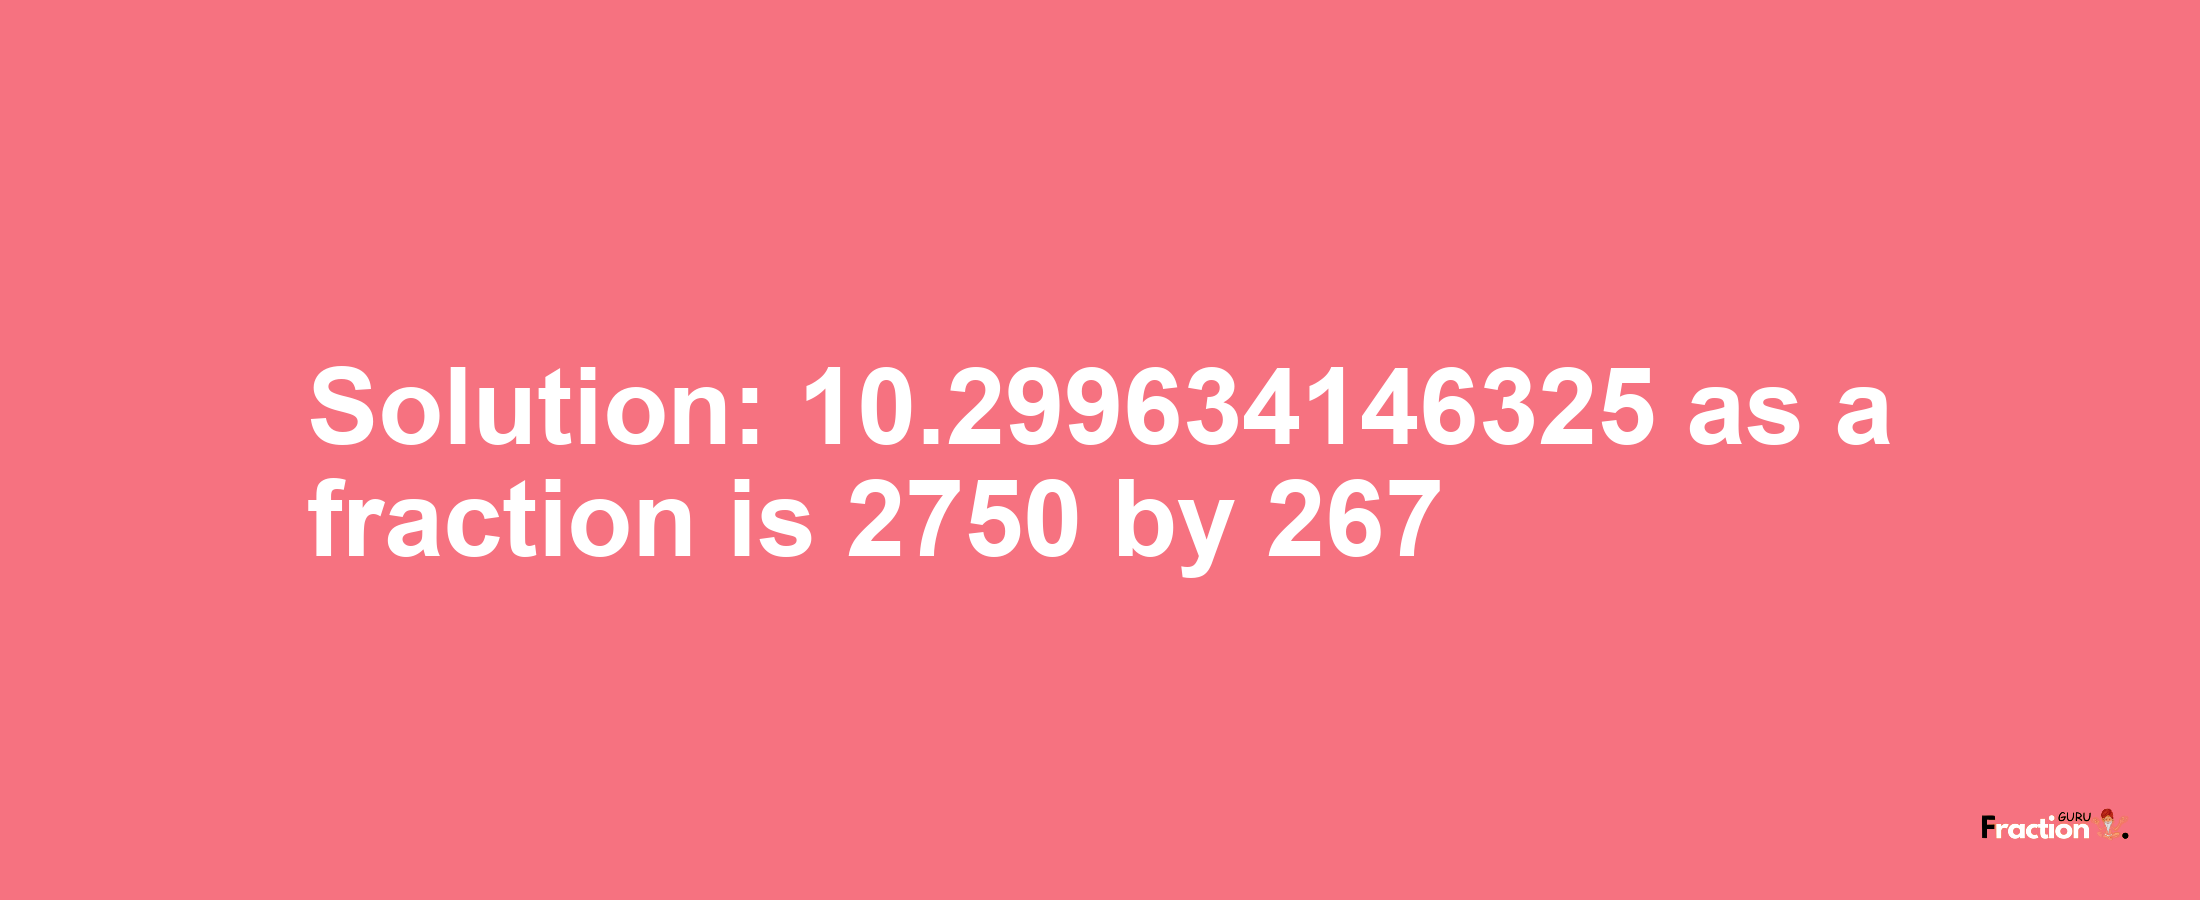 Solution:10.299634146325 as a fraction is 2750/267